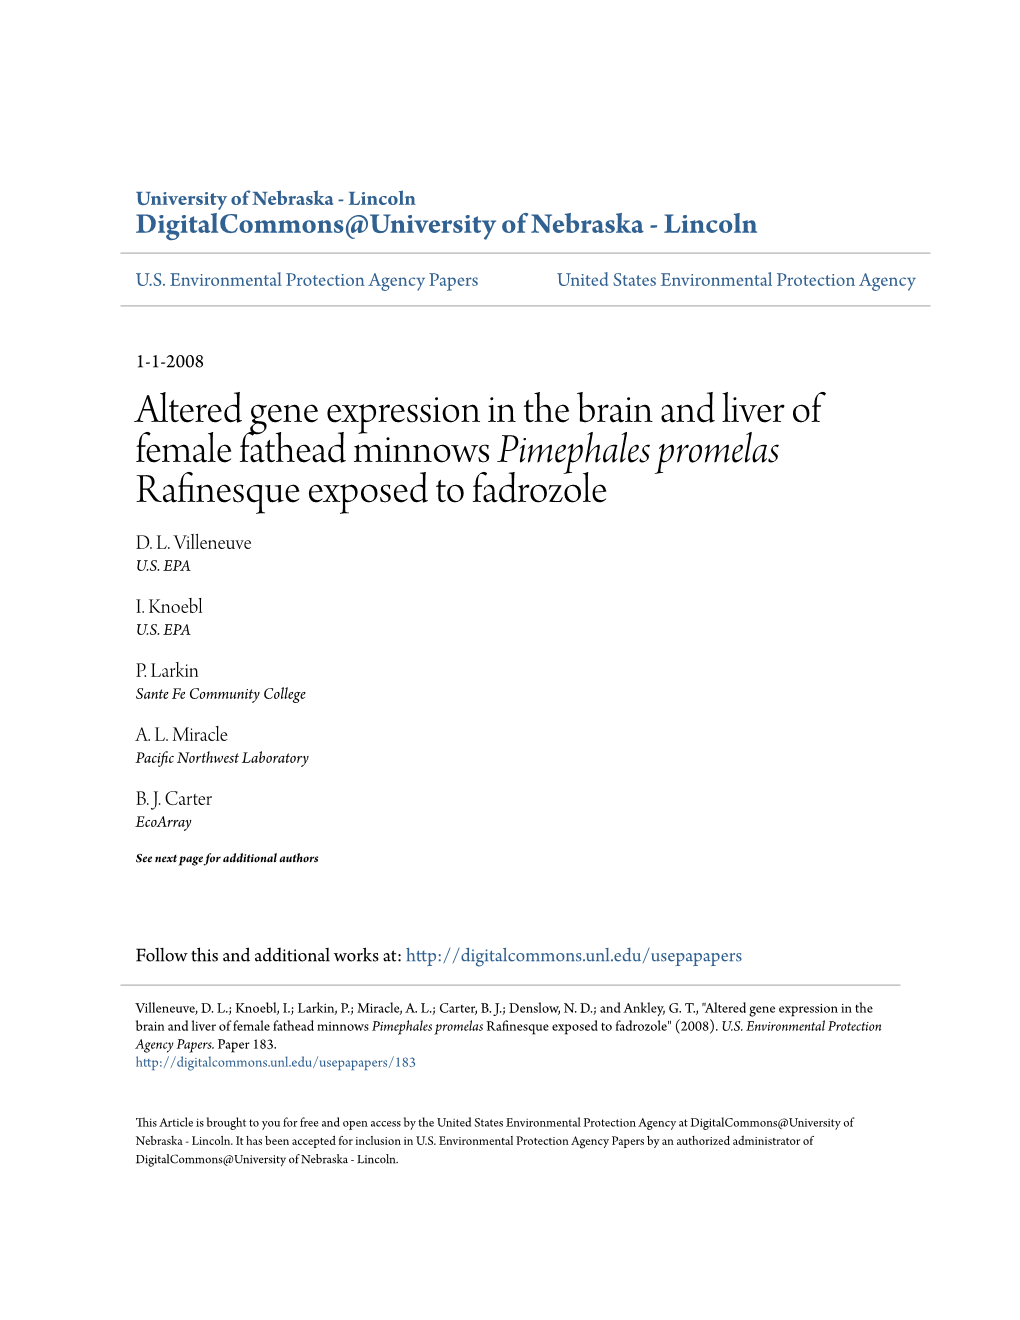 Altered Gene Expression in the Brain and Liver of Female Fathead Minnows Pimephales Promelas Rafinesque Exposed to Fadrozole D